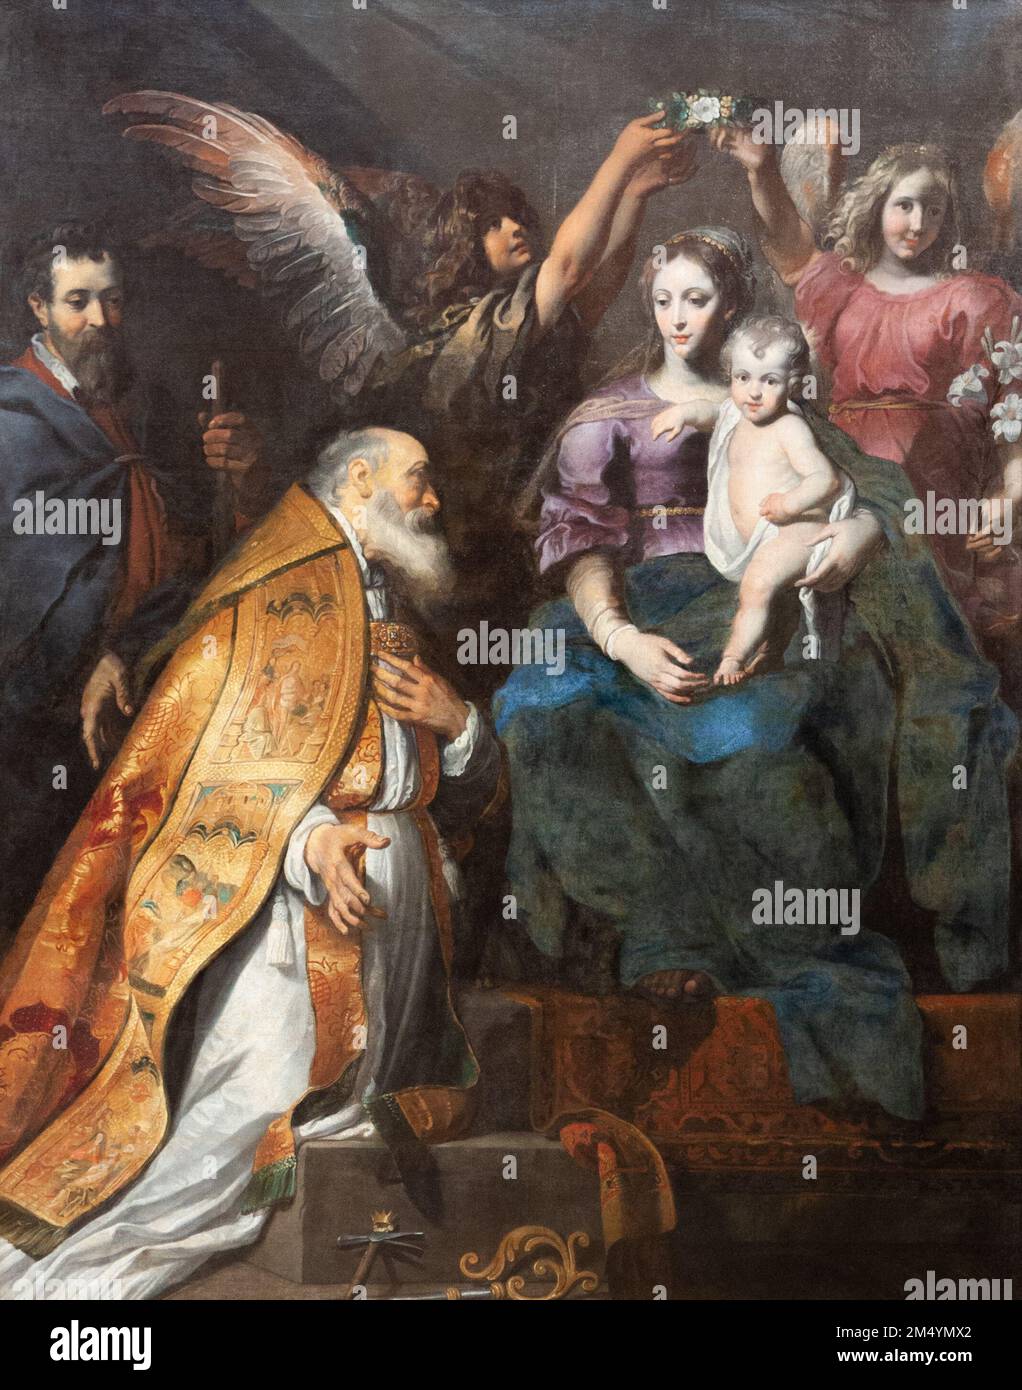 Saint Eligius (also Eloy, Eloi or Loye) at the feet of the Virgin Mary and Infant Jesus by Gerard Seghers (1591-1651) Stock Photo